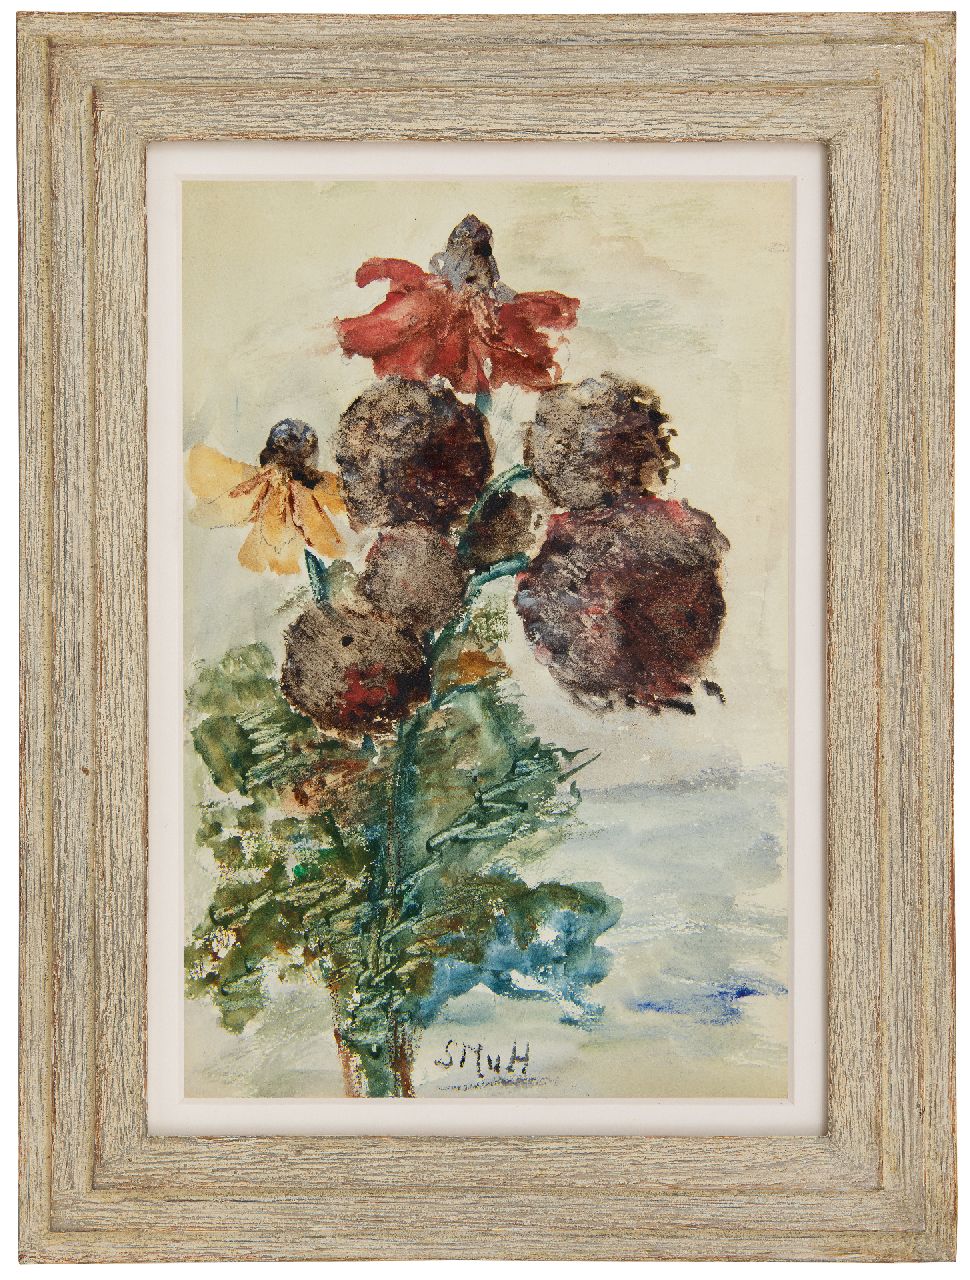 Mesdag-van Houten S.  | Sina 'Sientje' Mesdag-van Houten | Watercolours and drawings offered for sale | Garden flowers with Cone-flowers, watercolour on paper 27.3 x 18.2 cm, signed l.c. with Initials